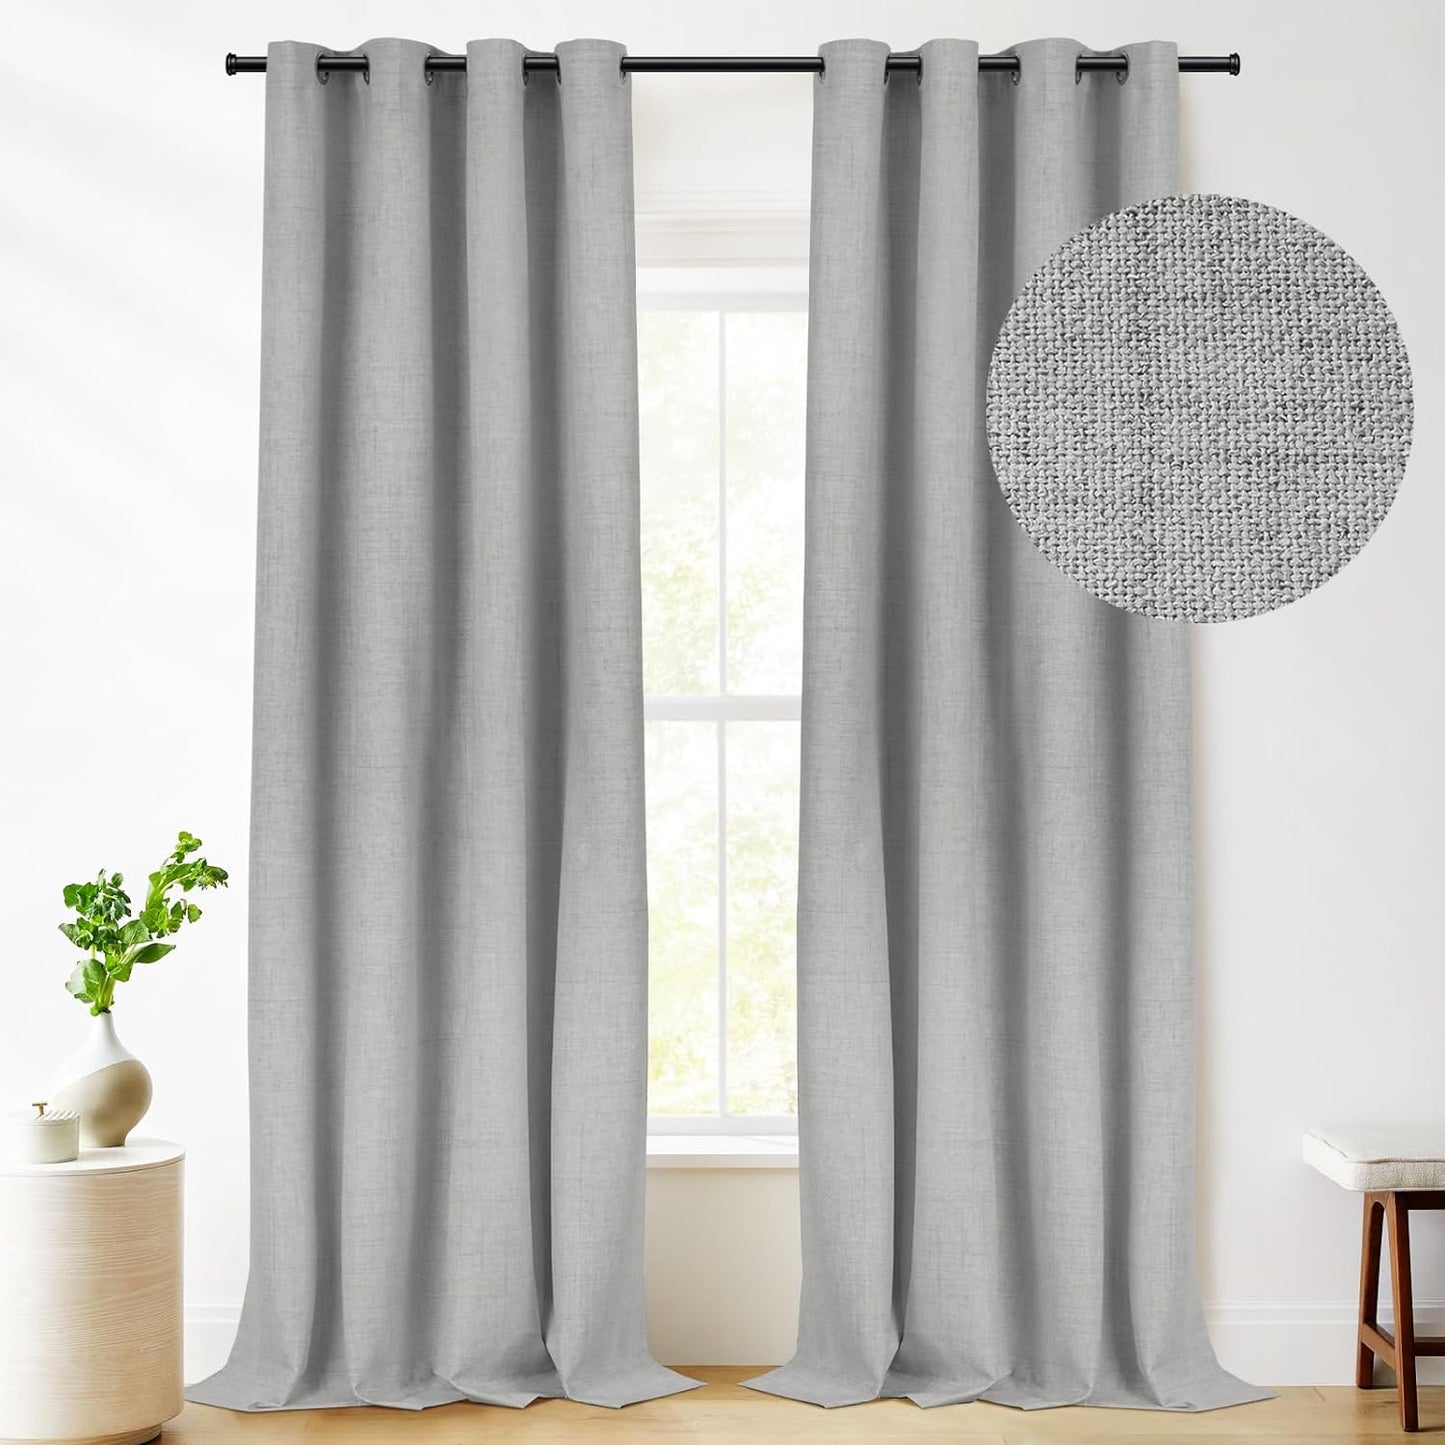 RHF Blackout Curtains 84 Inch Length 2 Panels Set, Primitive Linen Look, 100% Blackout Curtains Linen Black Out Curtains for Bedroom Windows, Burlap Grommet Curtains-(50X84, Oatmeal)  Rose Home Fashion Grey W50 X L84 